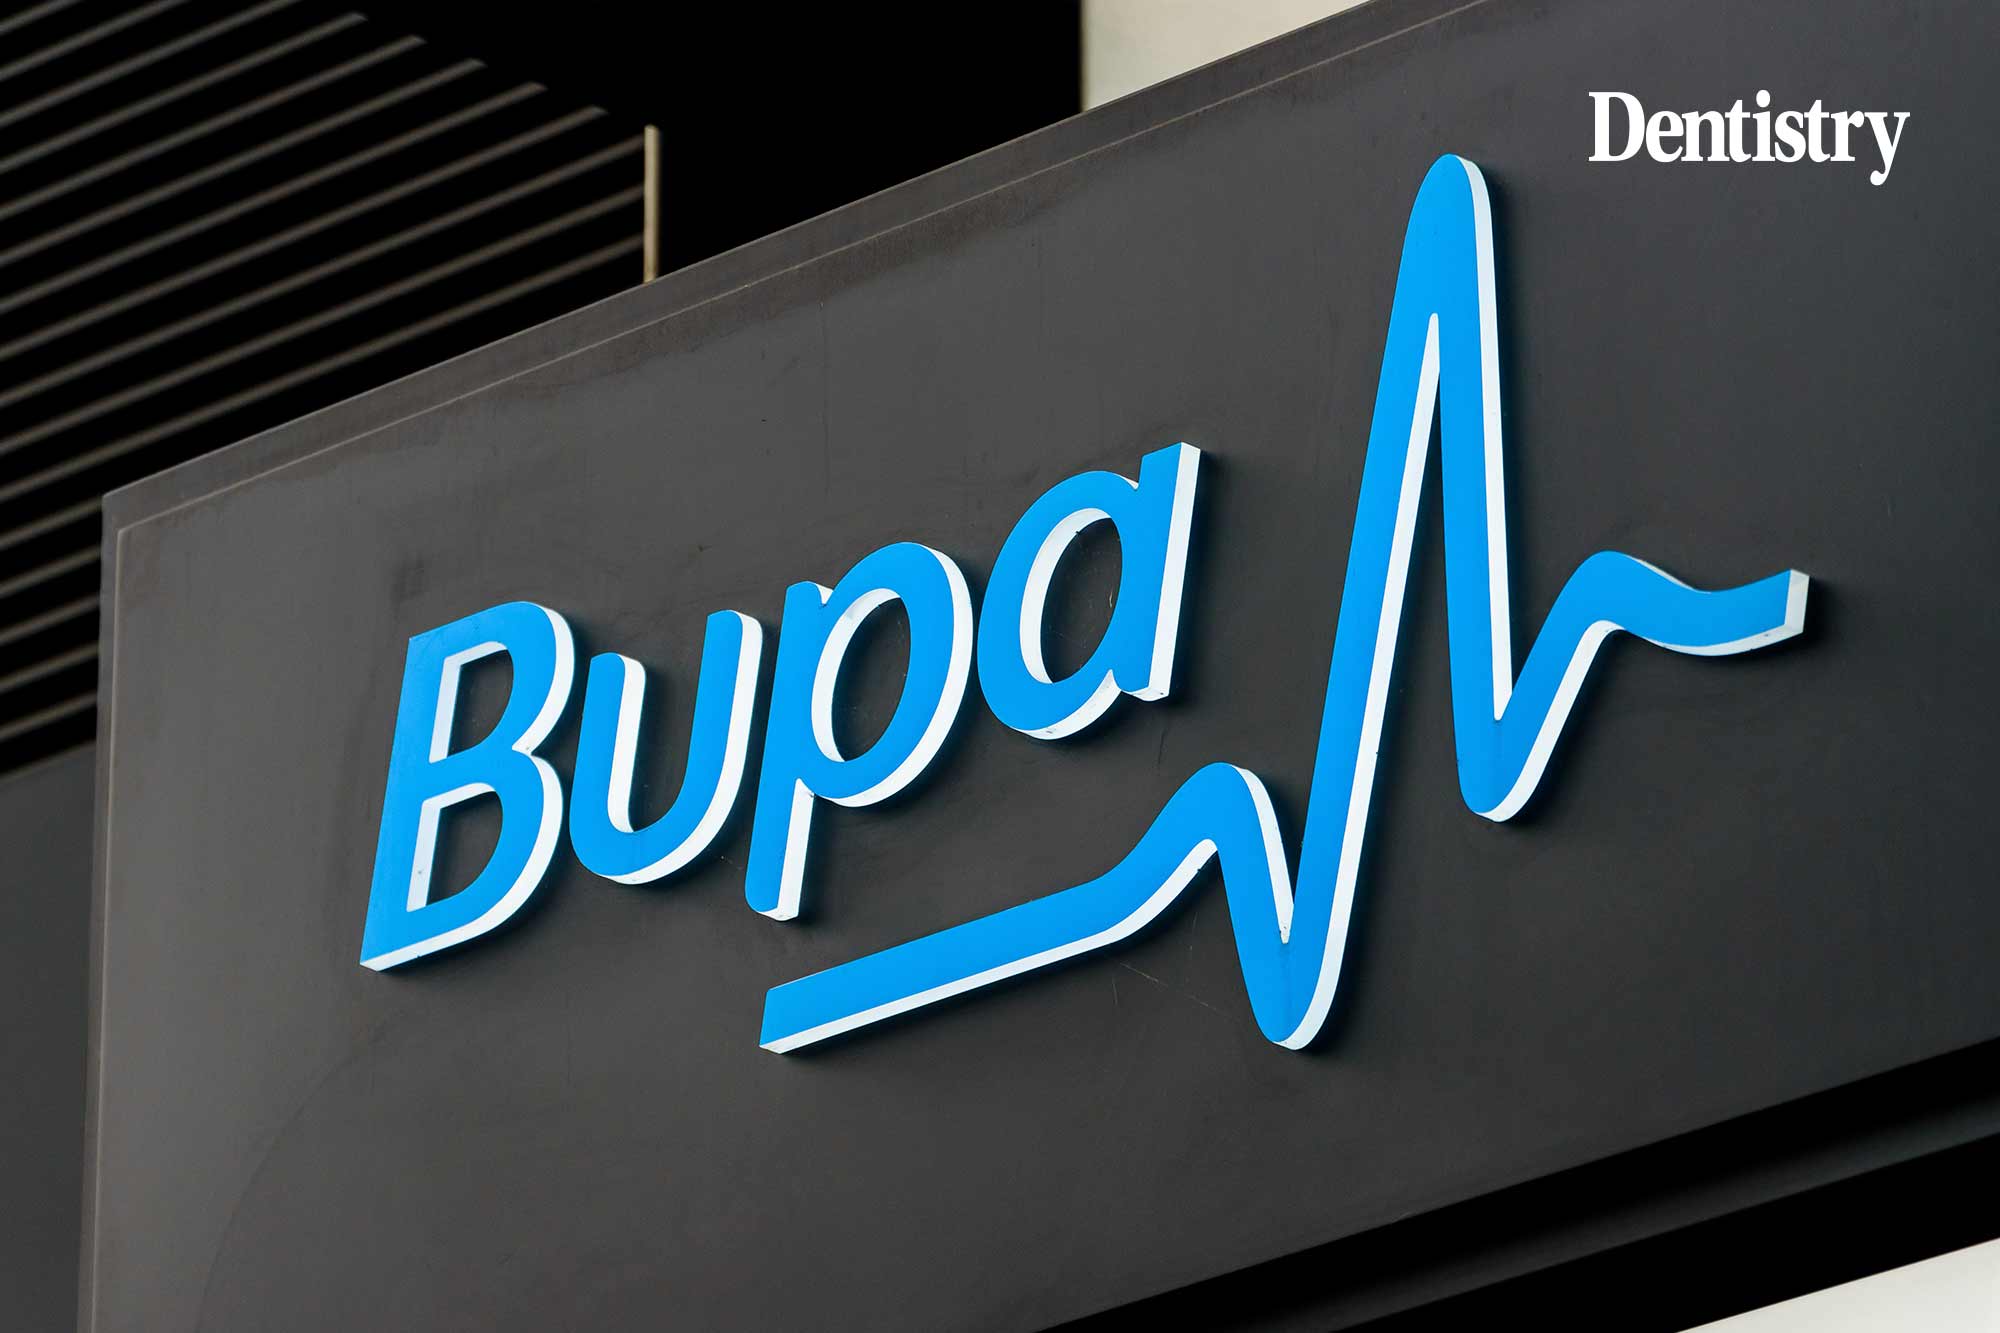 Bupa to close more than 80 dental practices